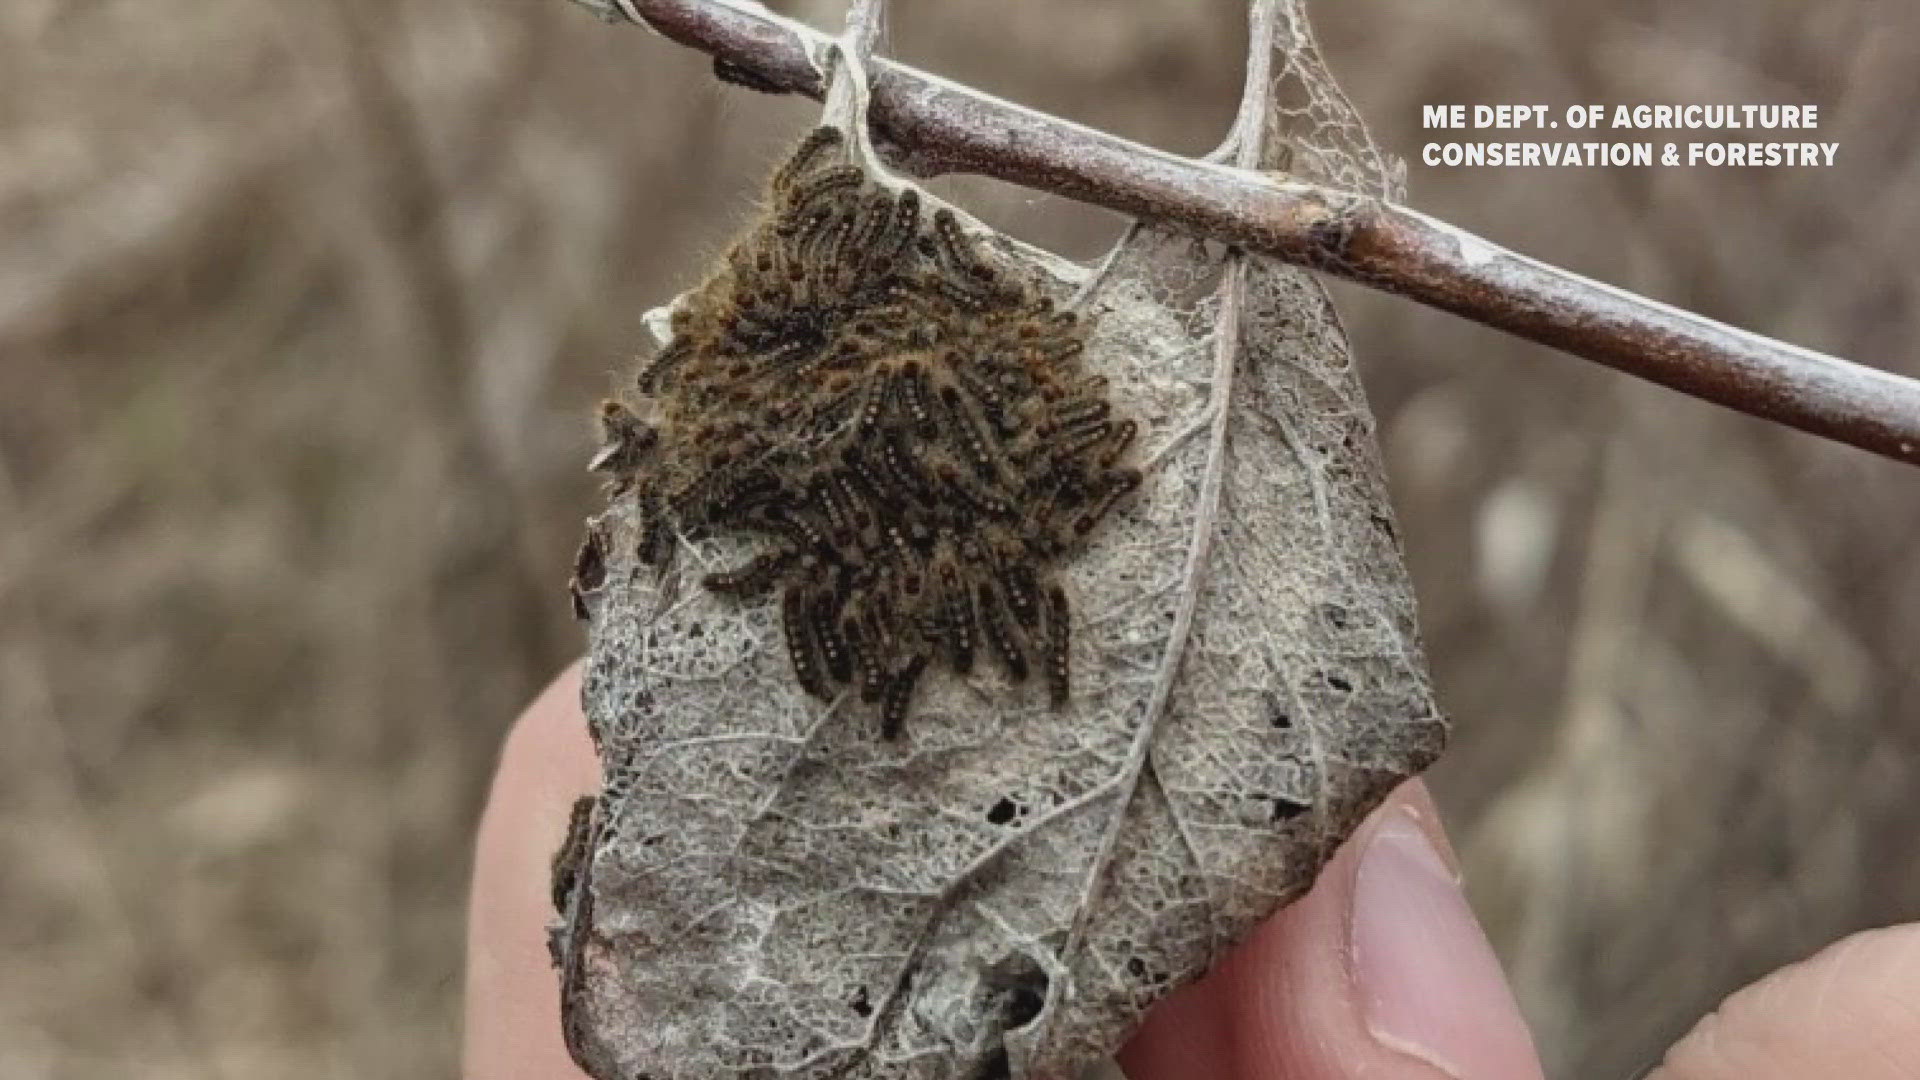 The caterpillars shed toxic hairlike fibers that can cause a skin rash similar to poison ivy.